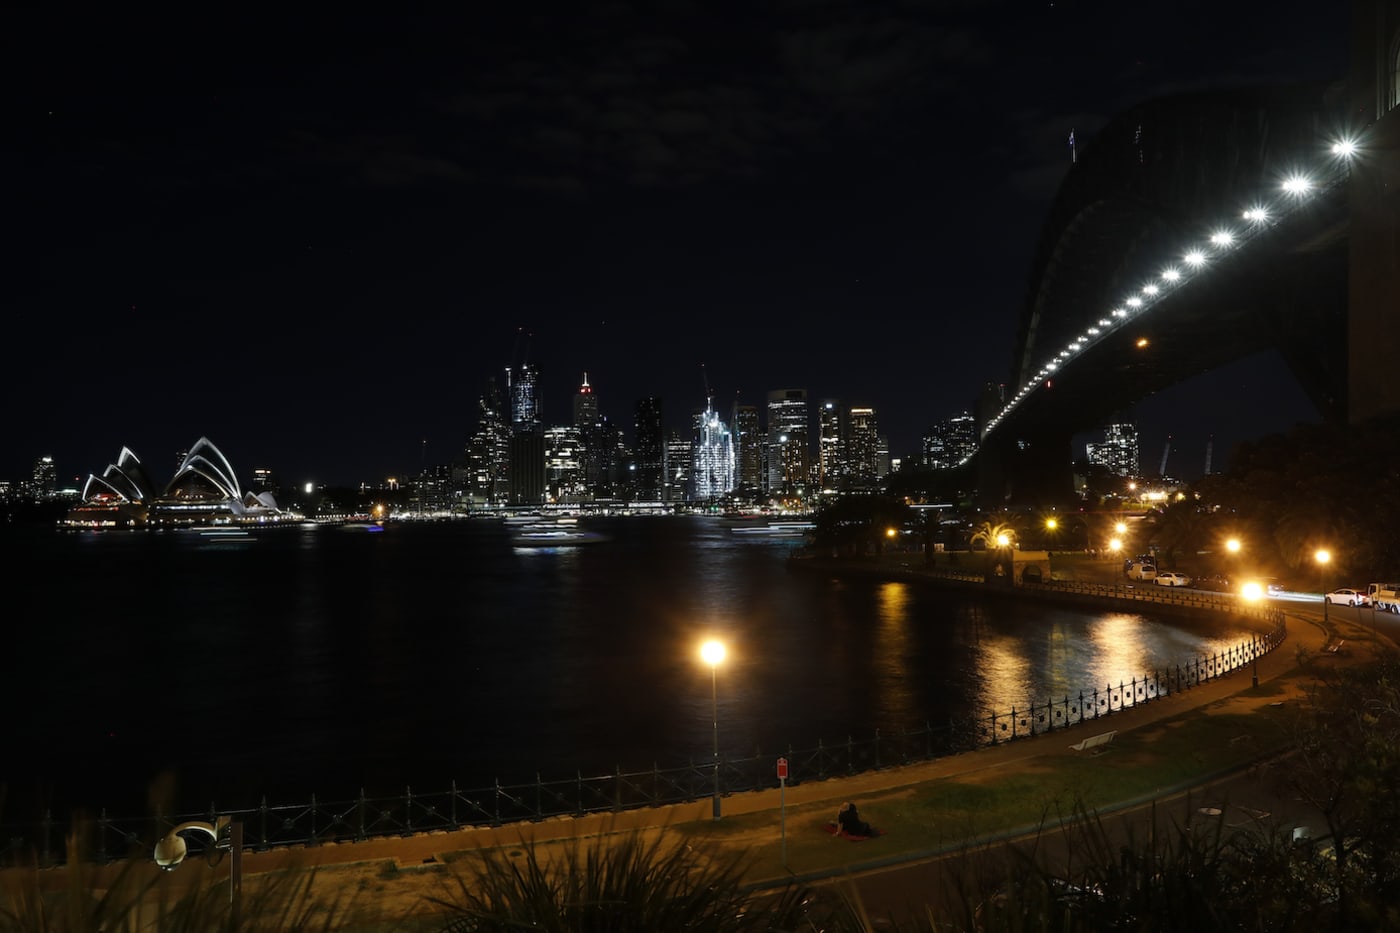 The Sydney Harbour Bridge and Sydney Opera House switched off their lights for Earth Hour 2021